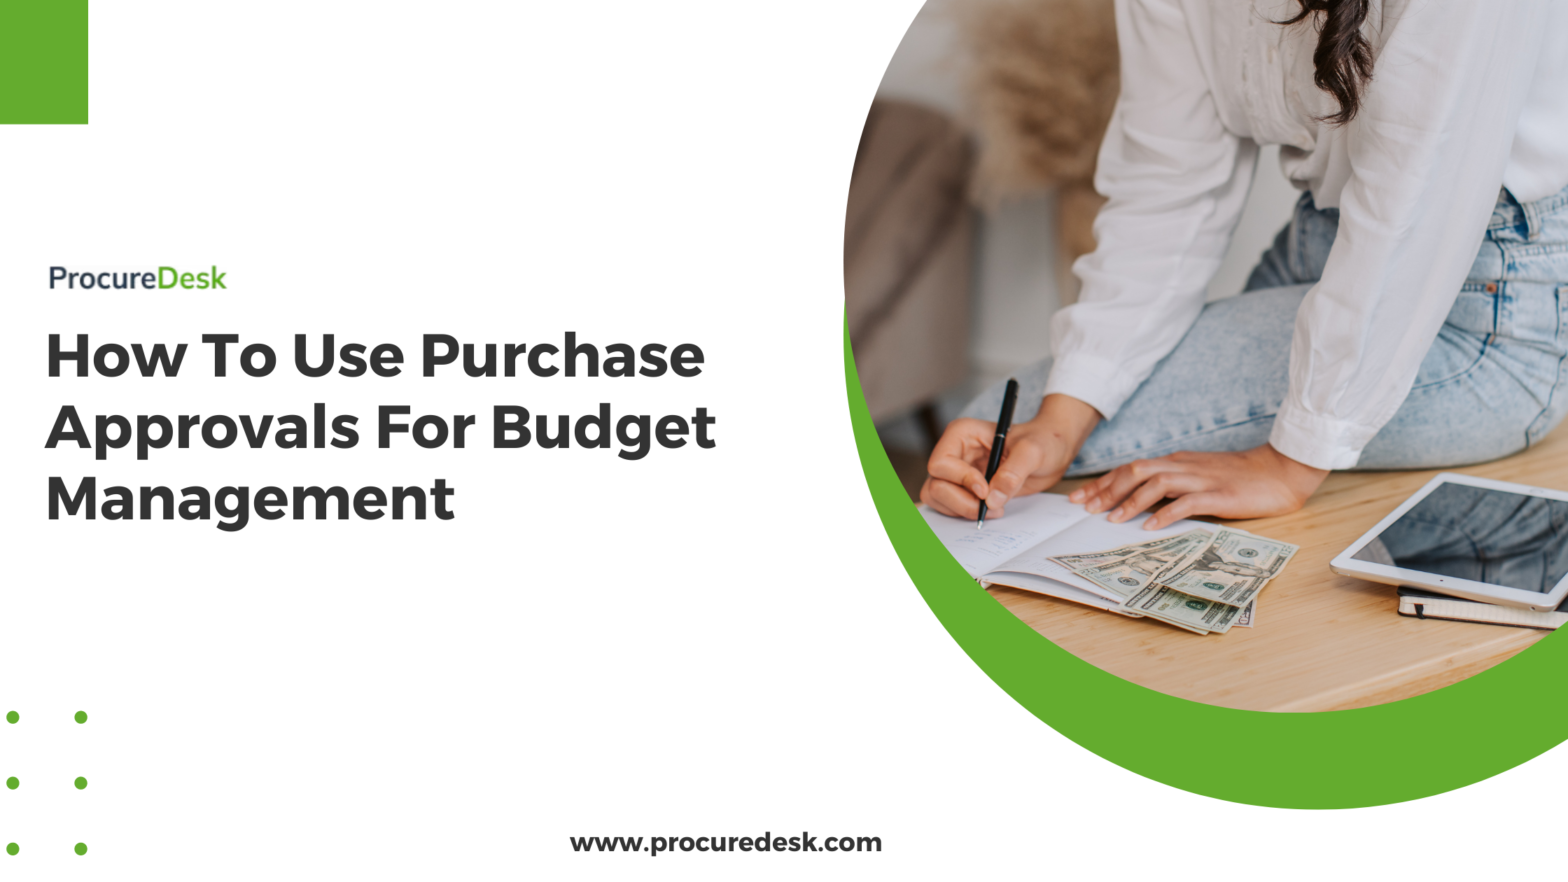 How To Use Purchase Approvals For Budget Management